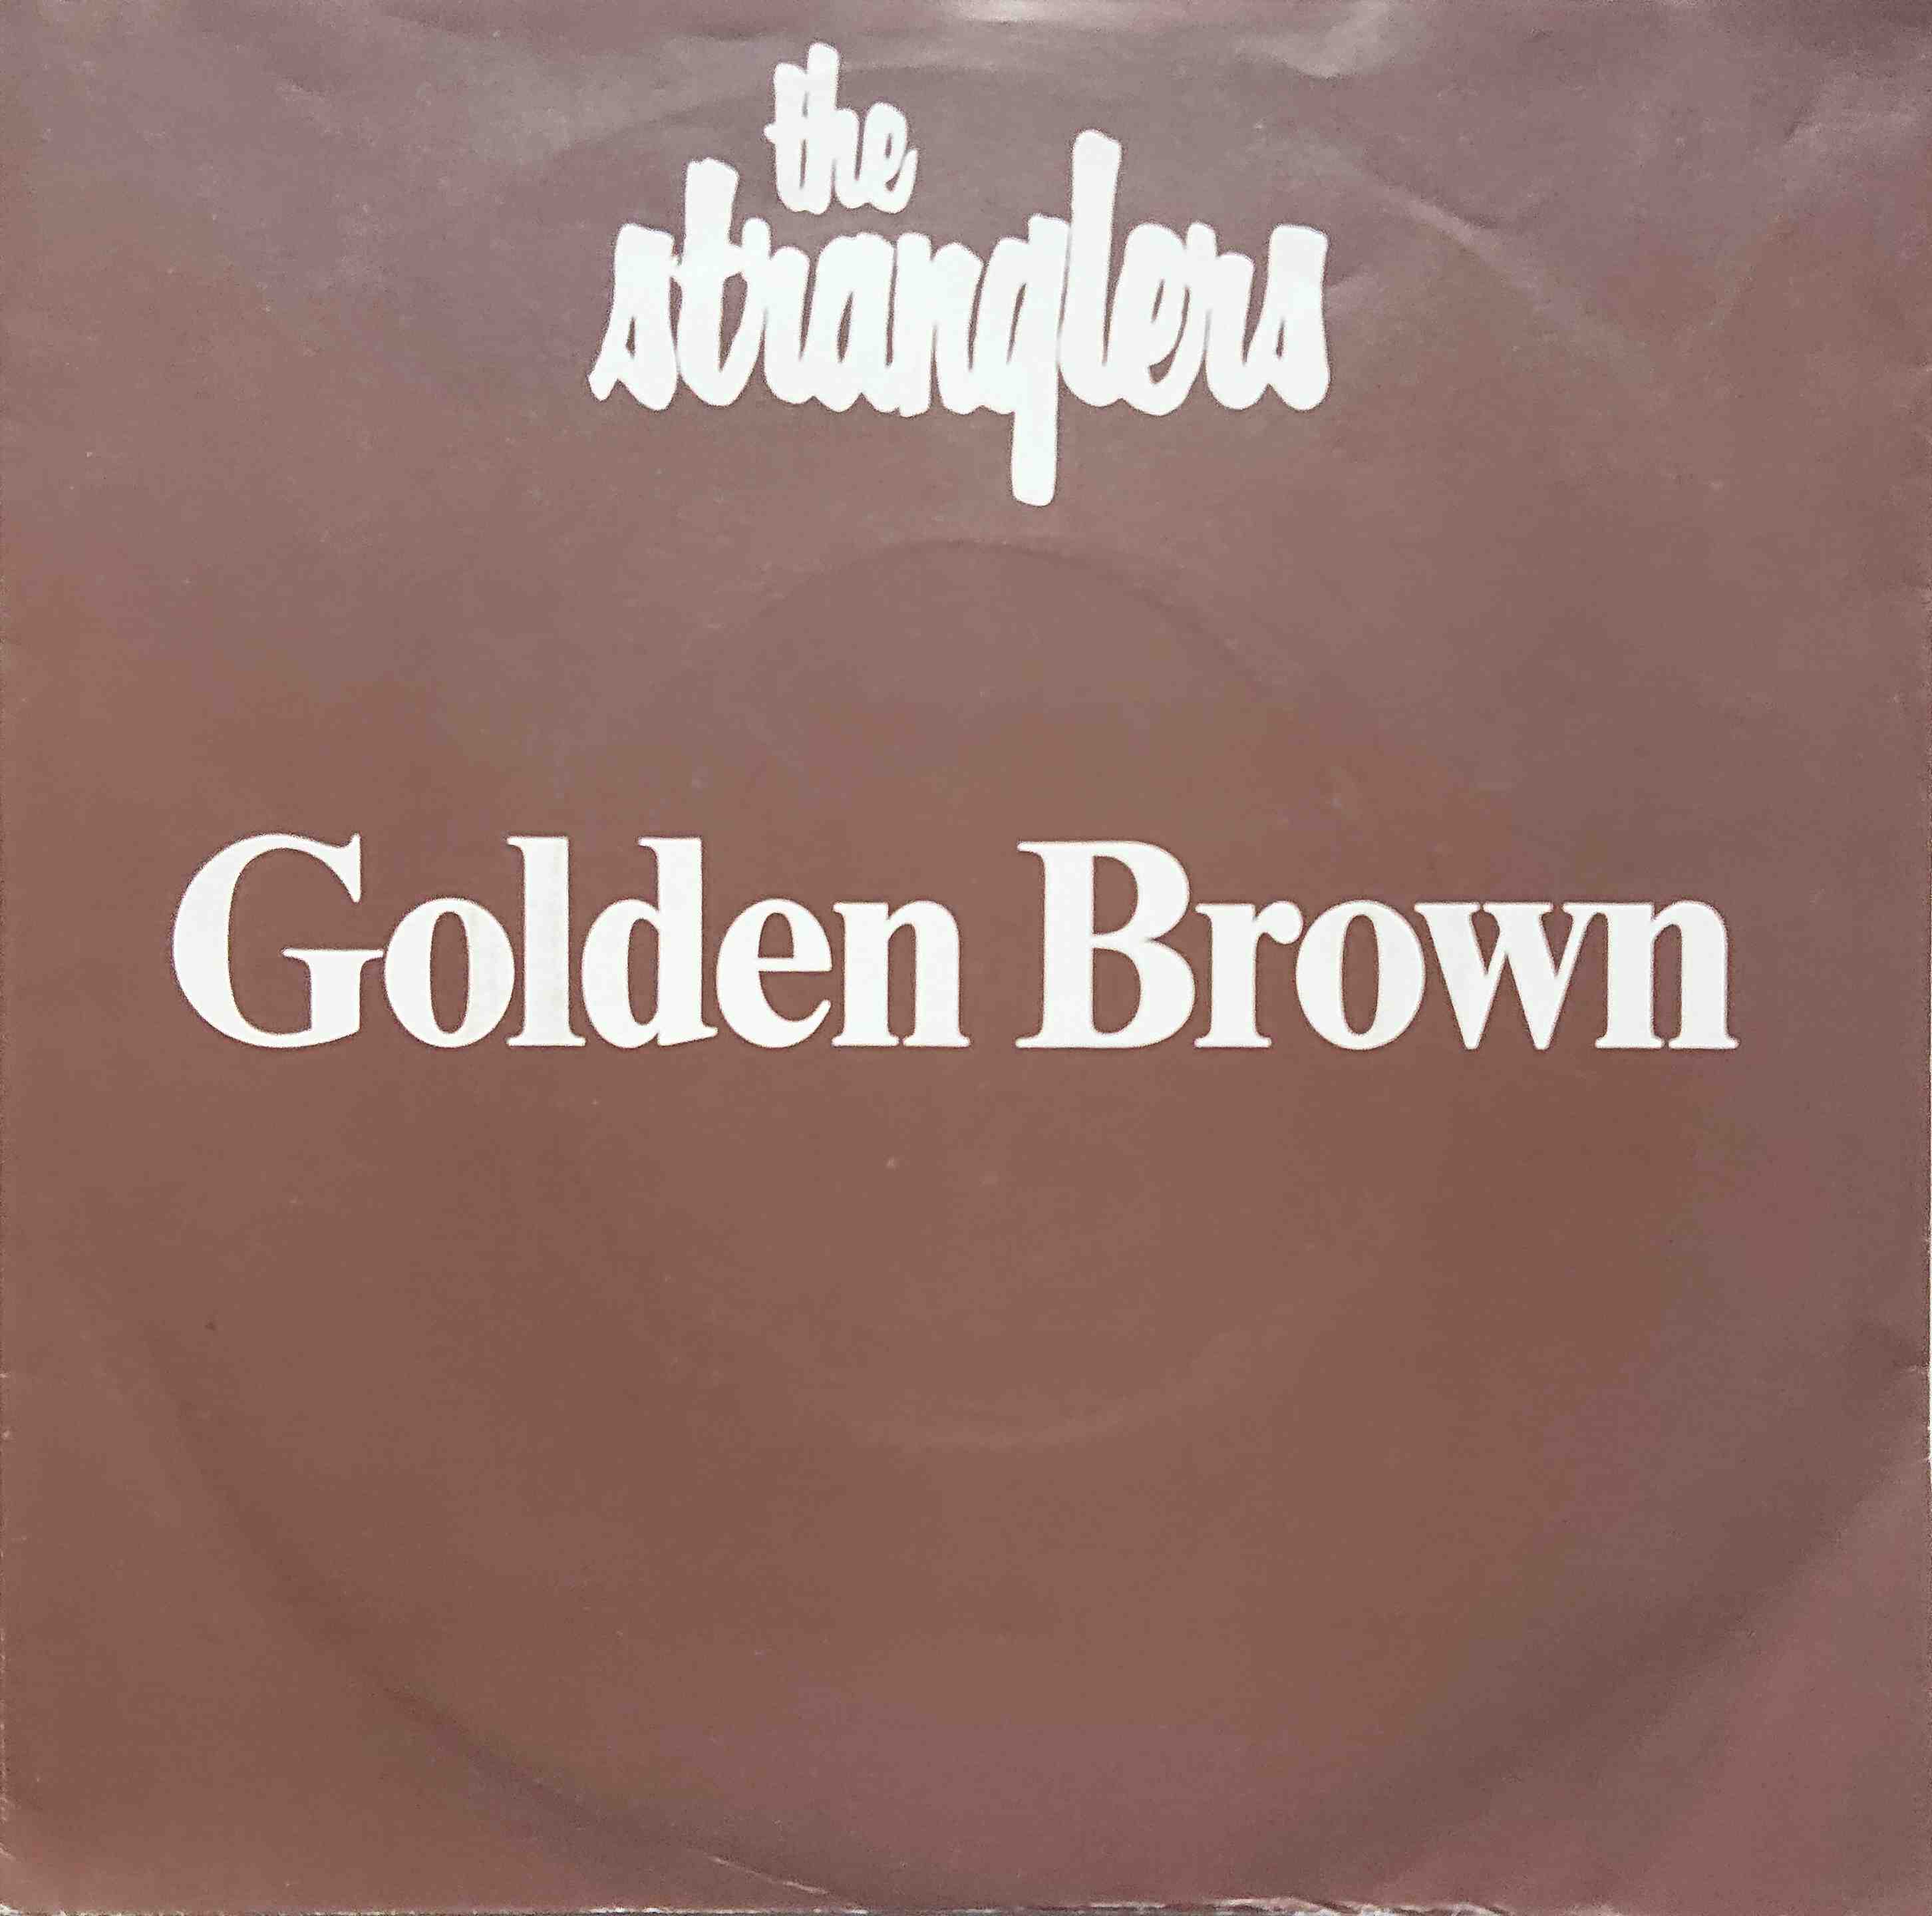 Picture of Golden brown by artist The Stranglers from The Stranglers singles